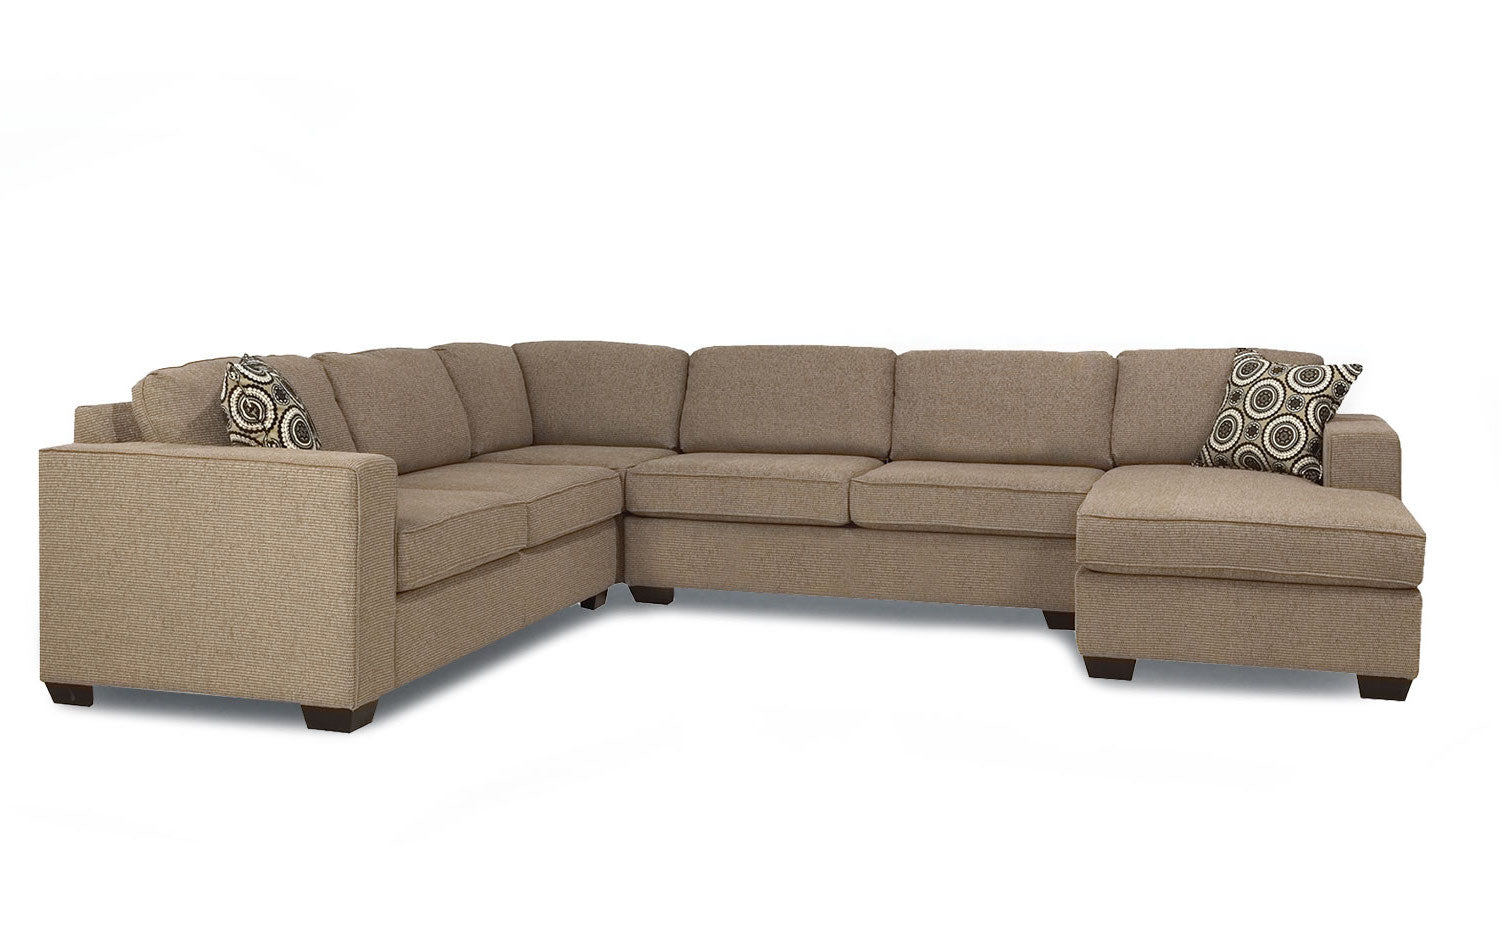 Picton Sectional